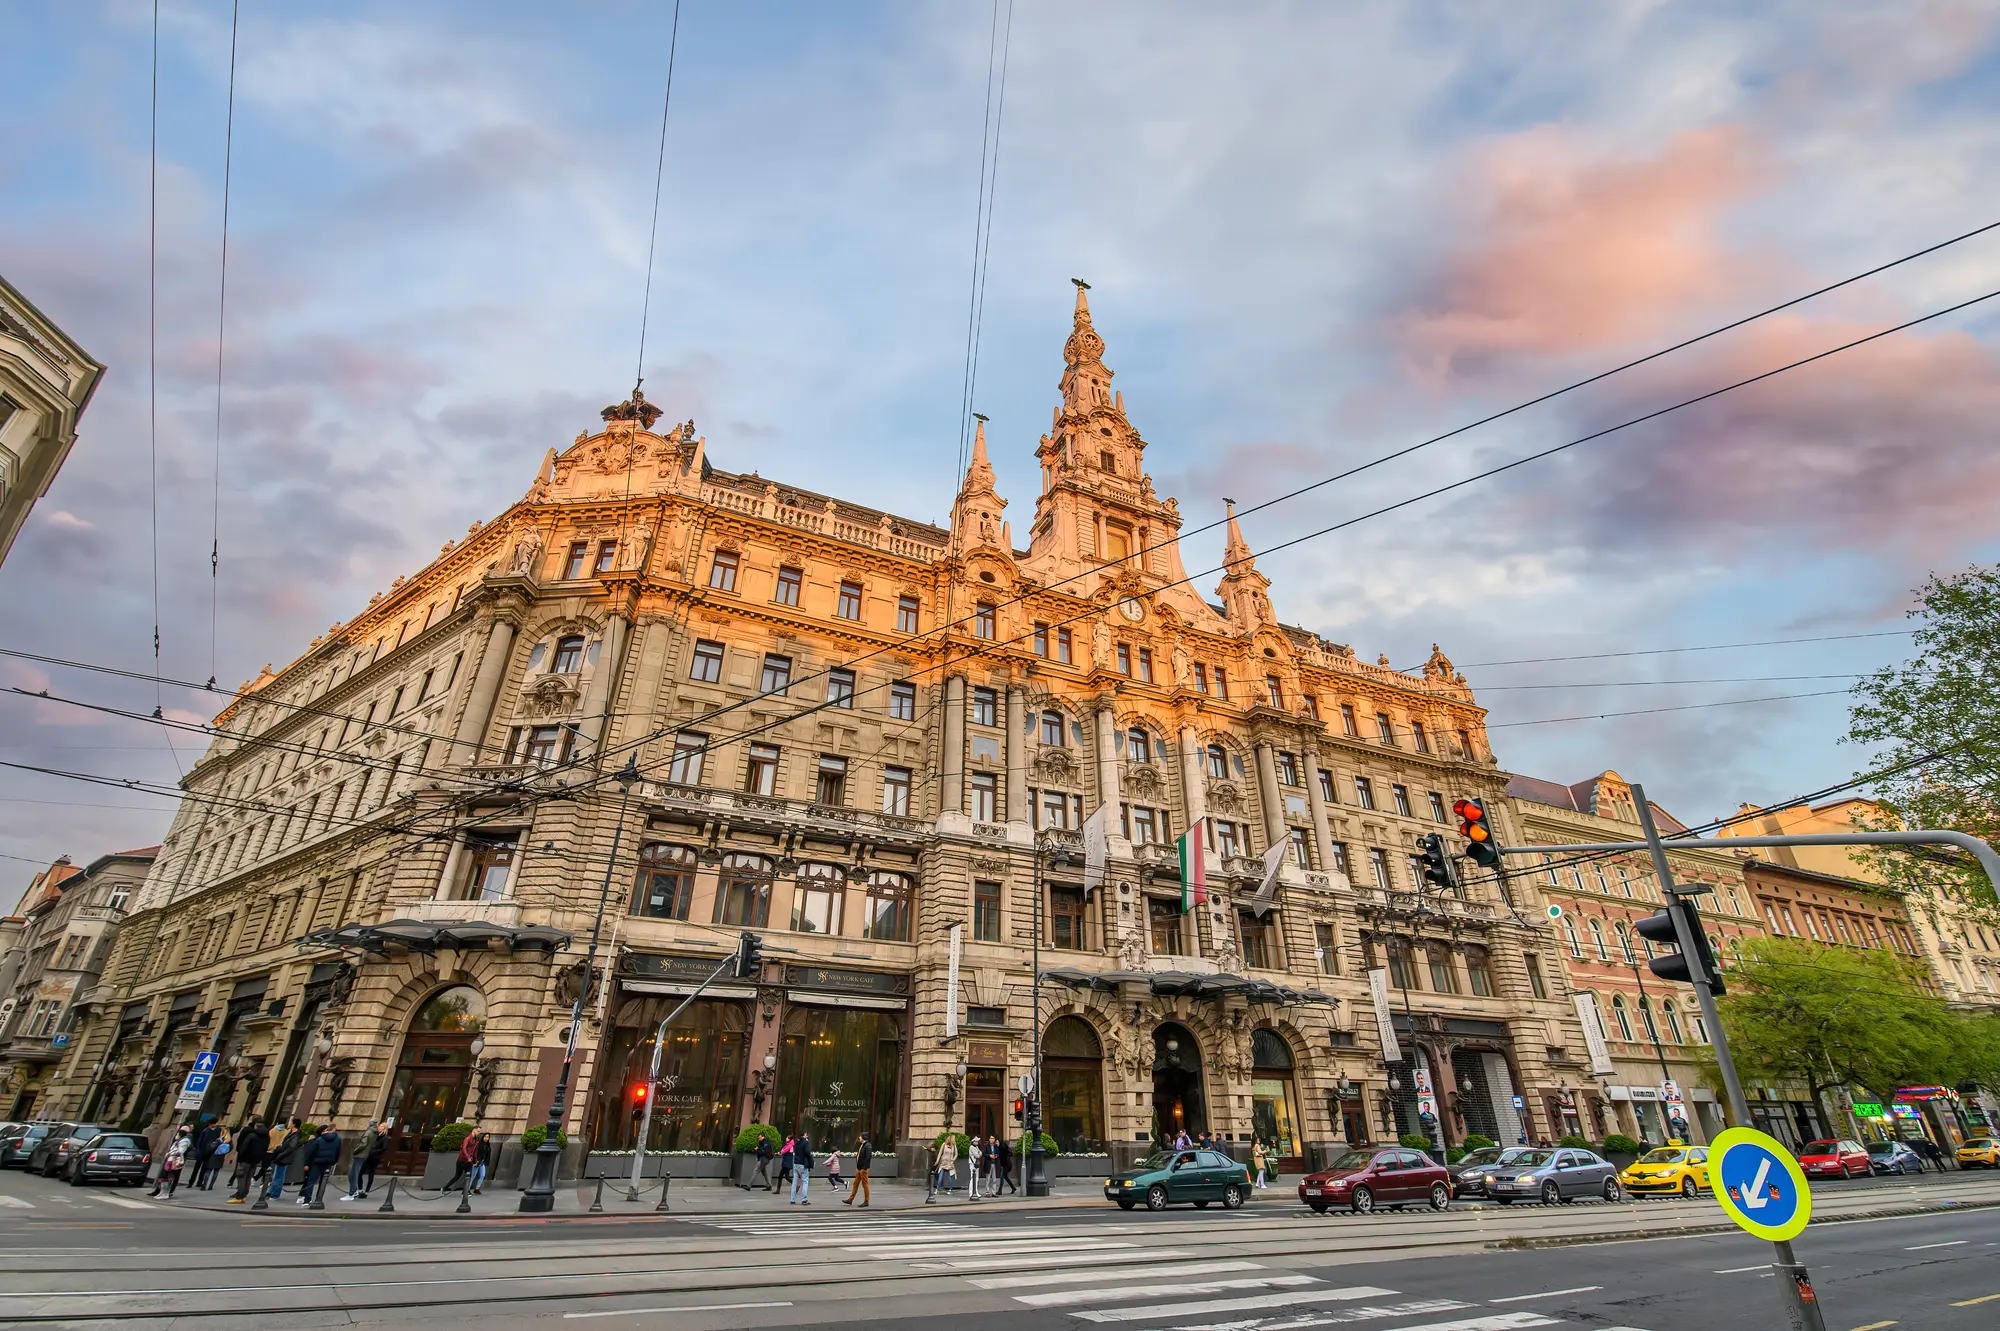 Old world beige stone building with ornate details housing New York Café during sunset on a corner in Budapest.